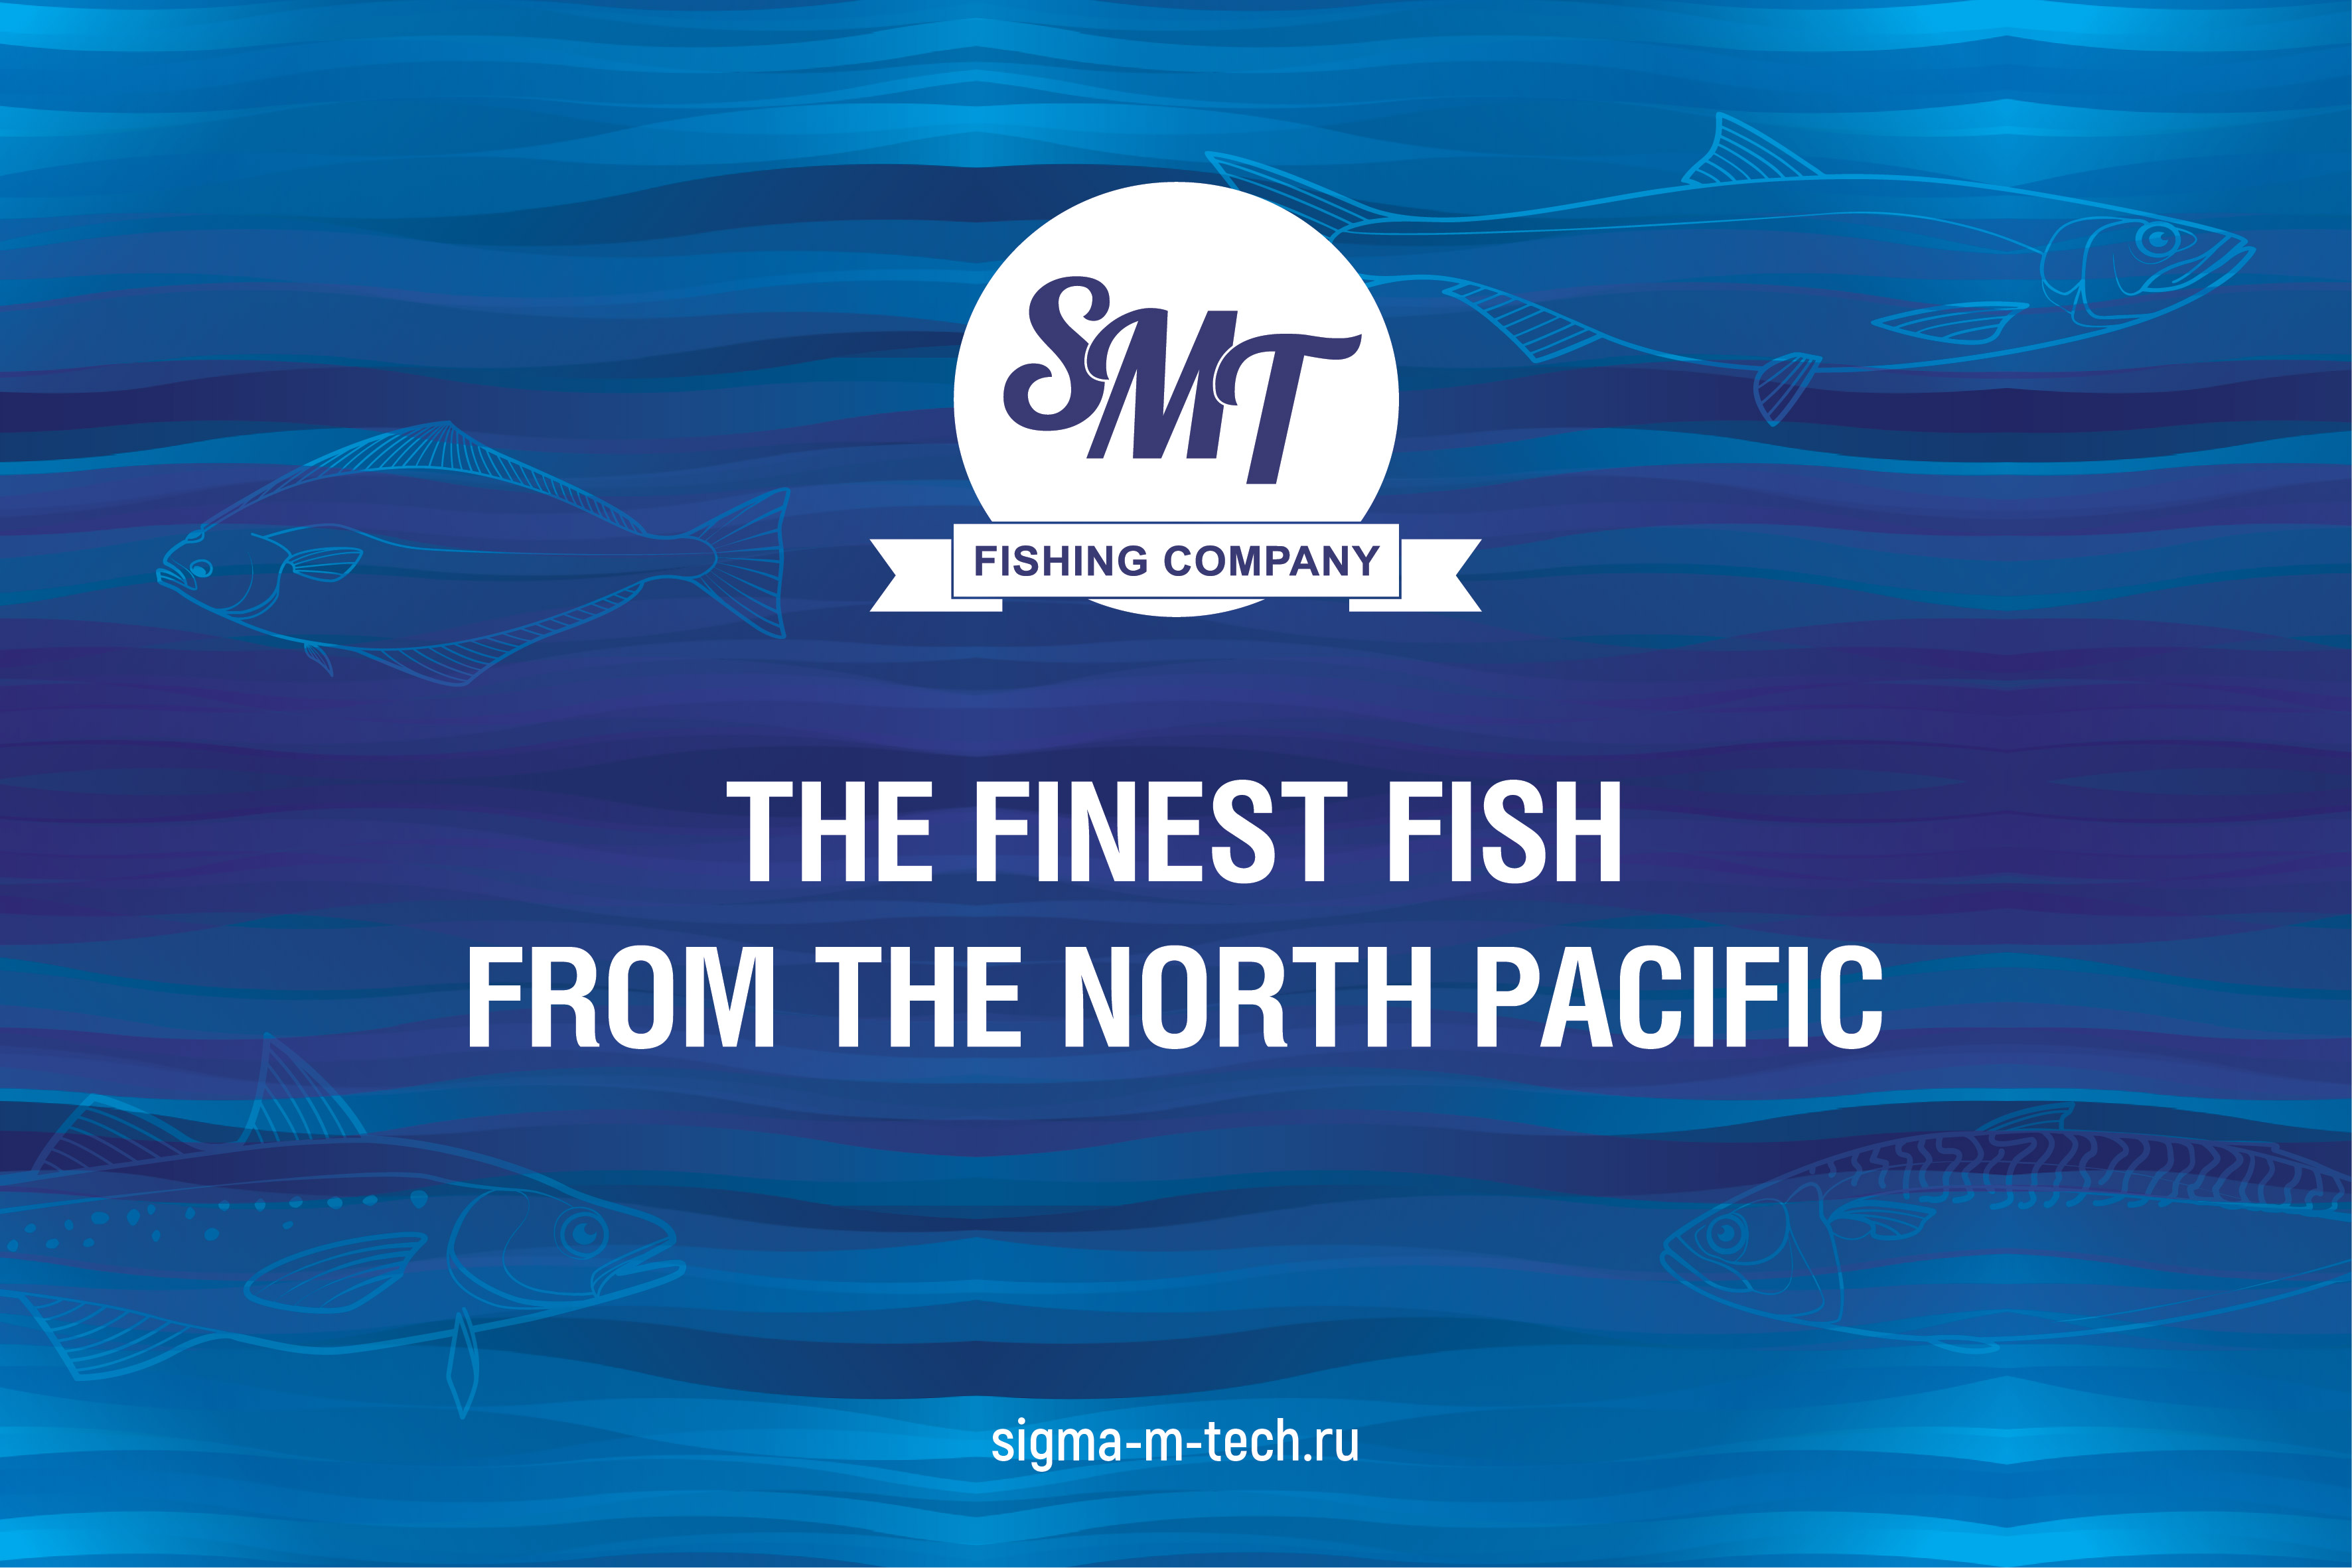 Sigma Marine Technology is the official partner of Seafood Expo Russia 2021